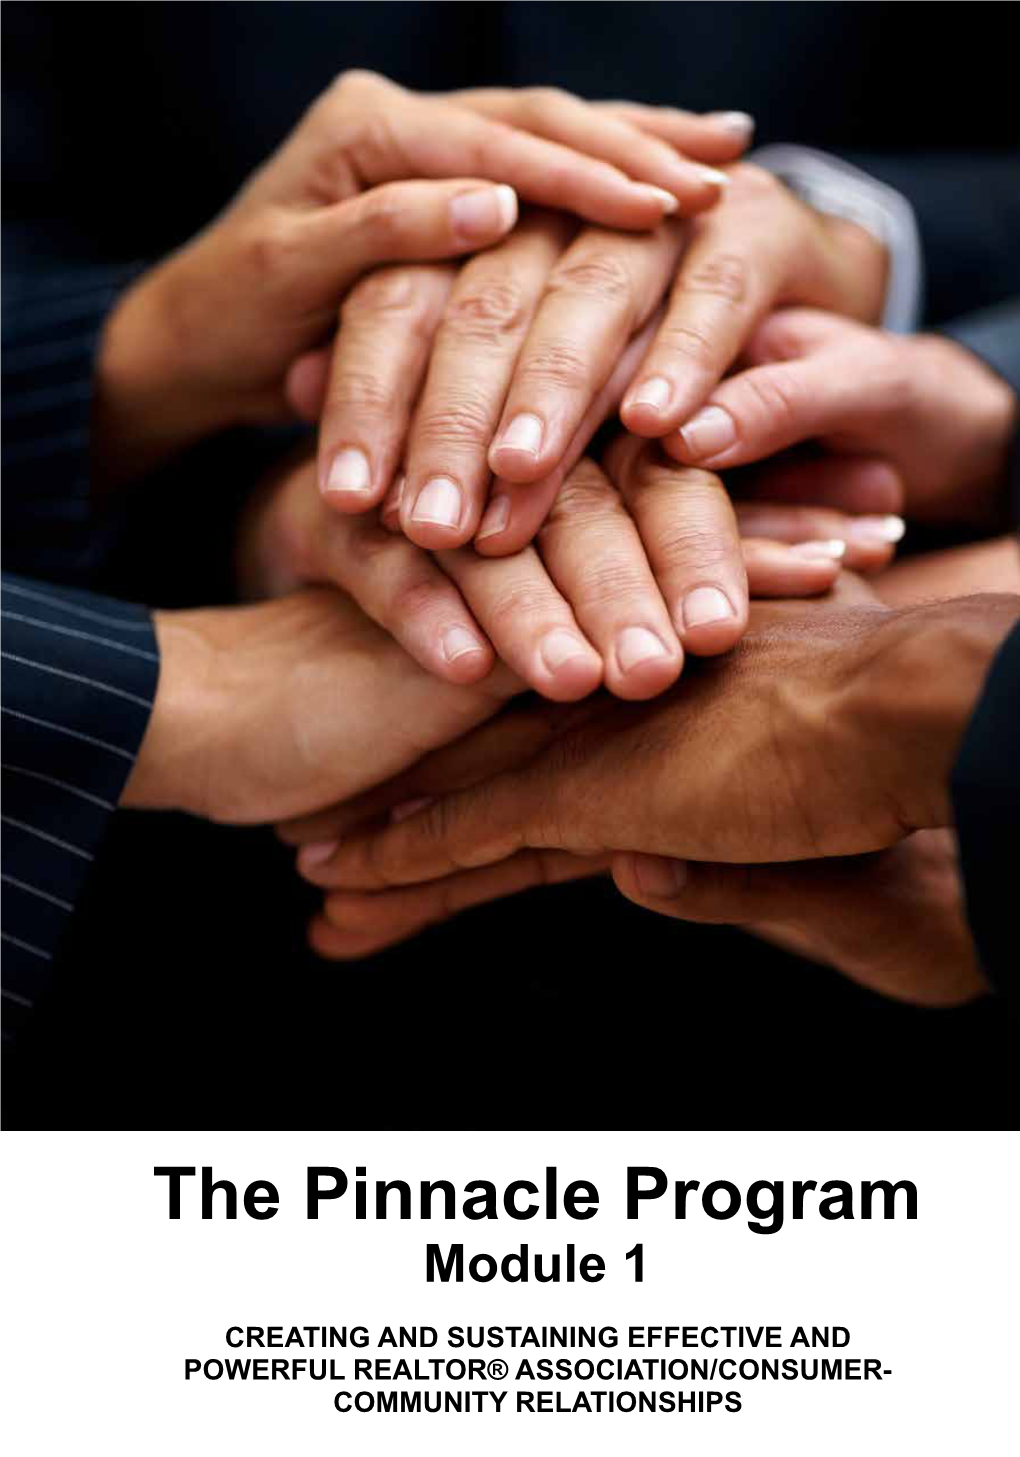 The Pinnacle Program Module 1 CREATING and SUSTAINING EFFECTIVE and POWERFUL REALTOR® ASSOCIATION/CONSUMER- COMMUNITY RELATIONSHIPS This Pinnacle Manual Belongs To